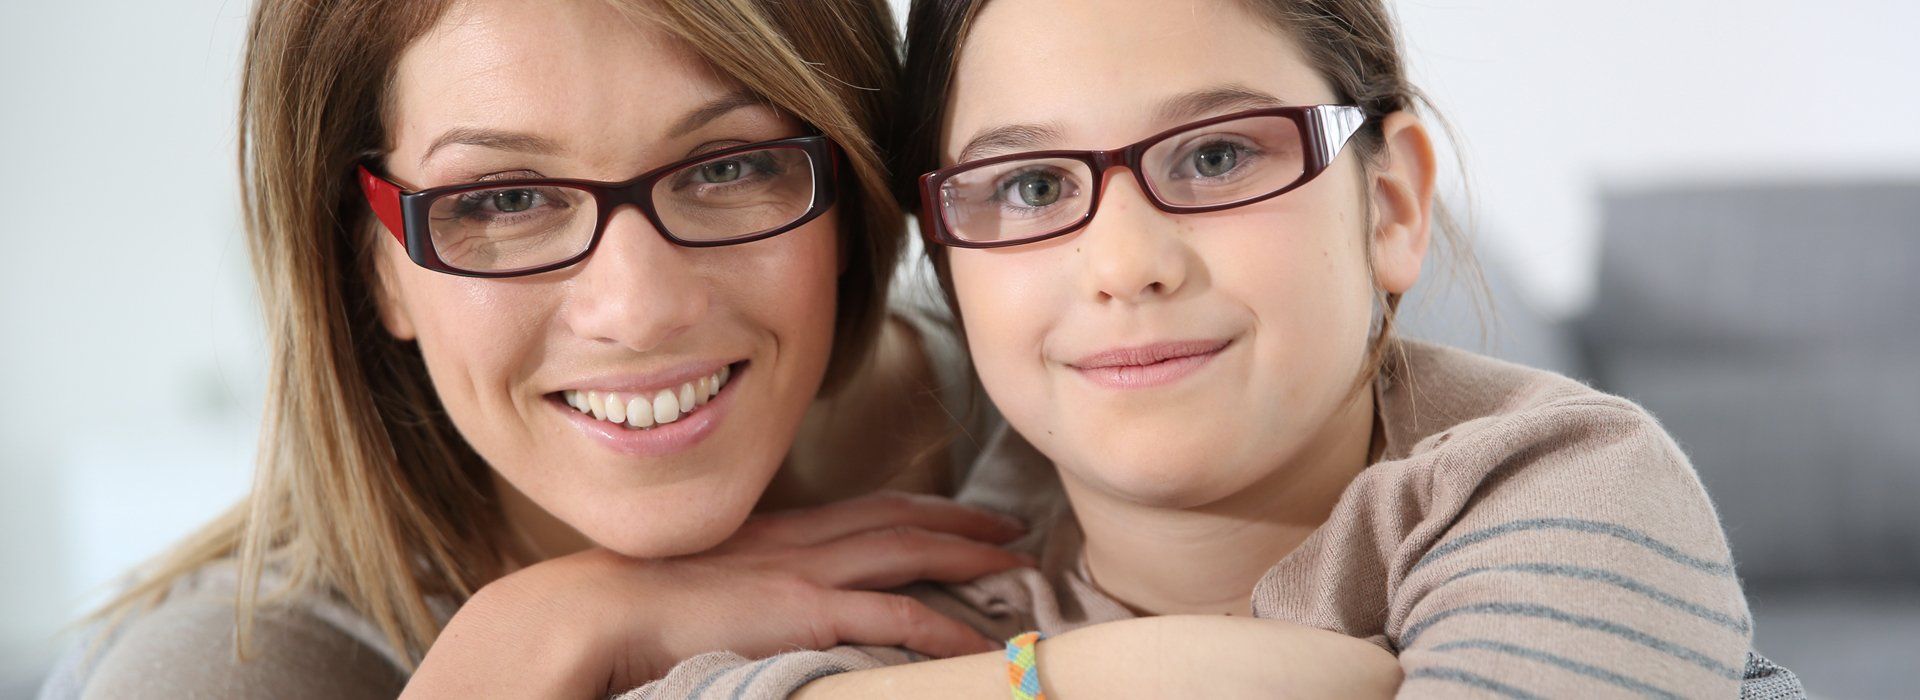 Lady and a girl with opticals